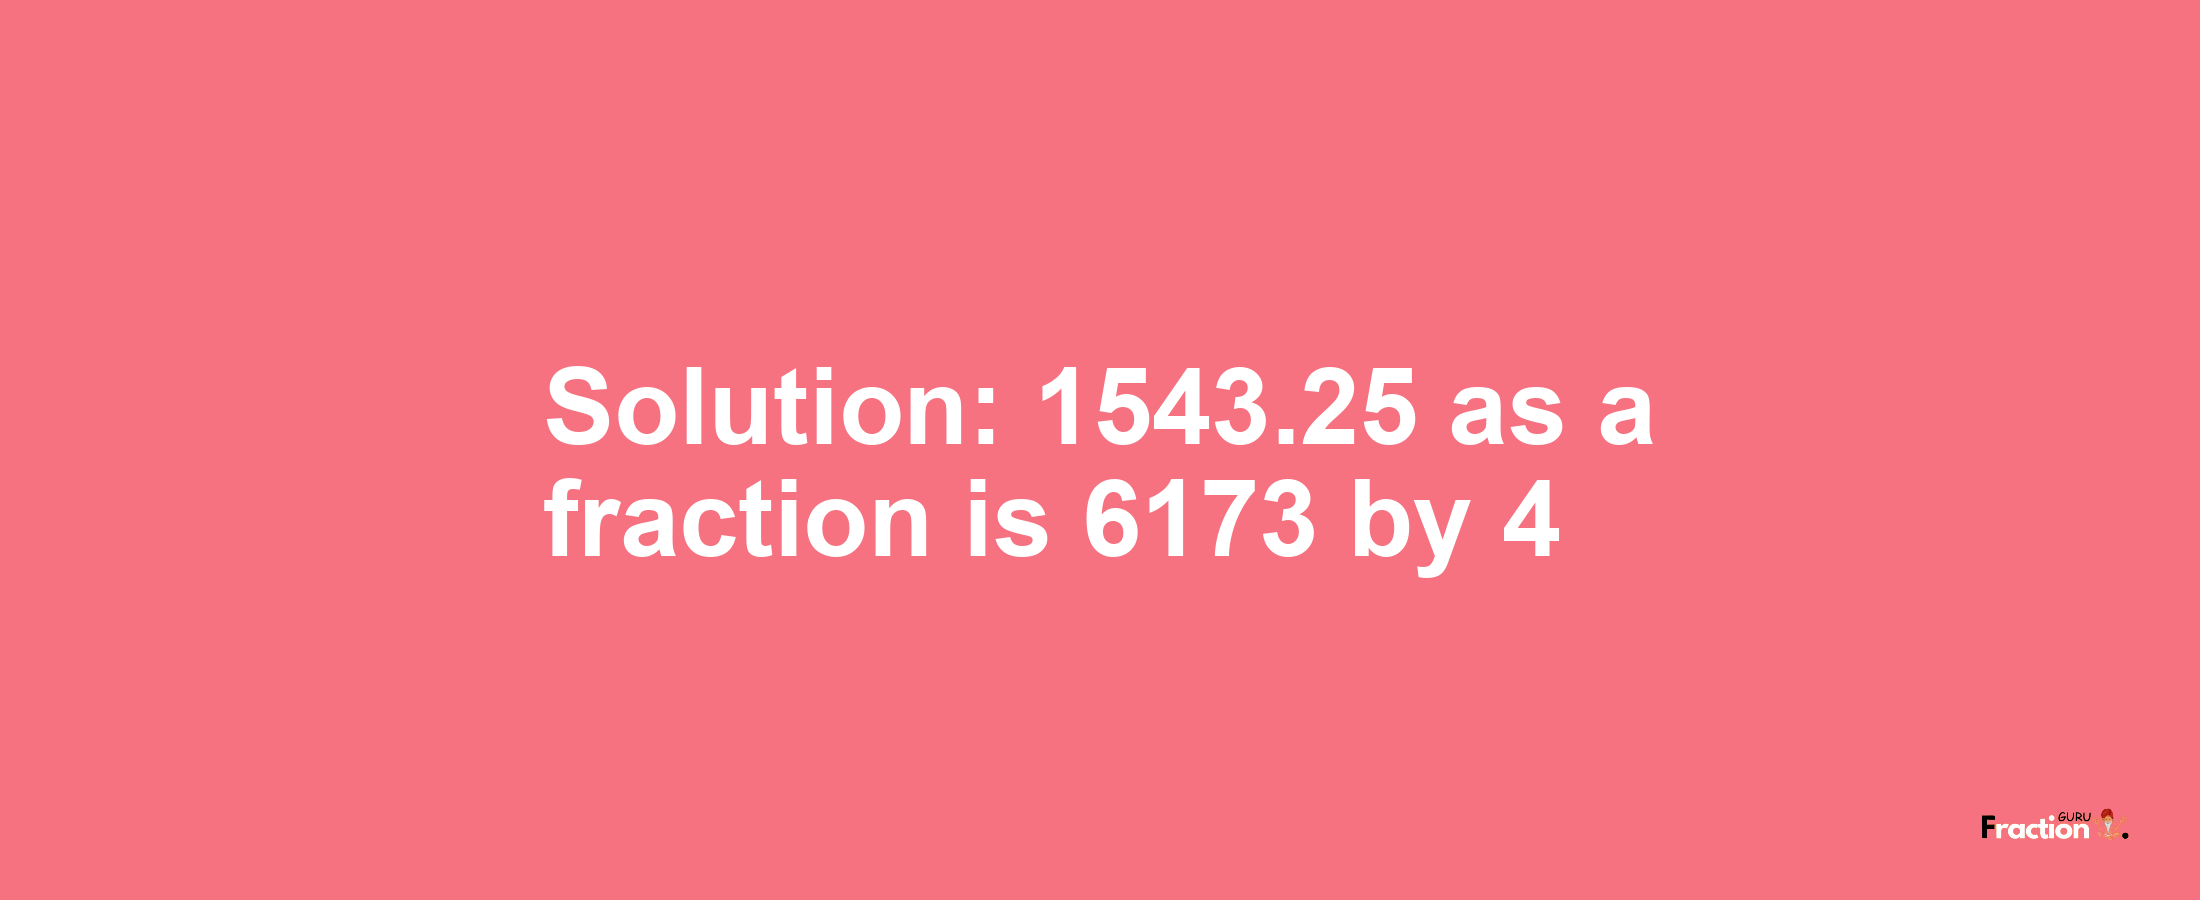 Solution:1543.25 as a fraction is 6173/4